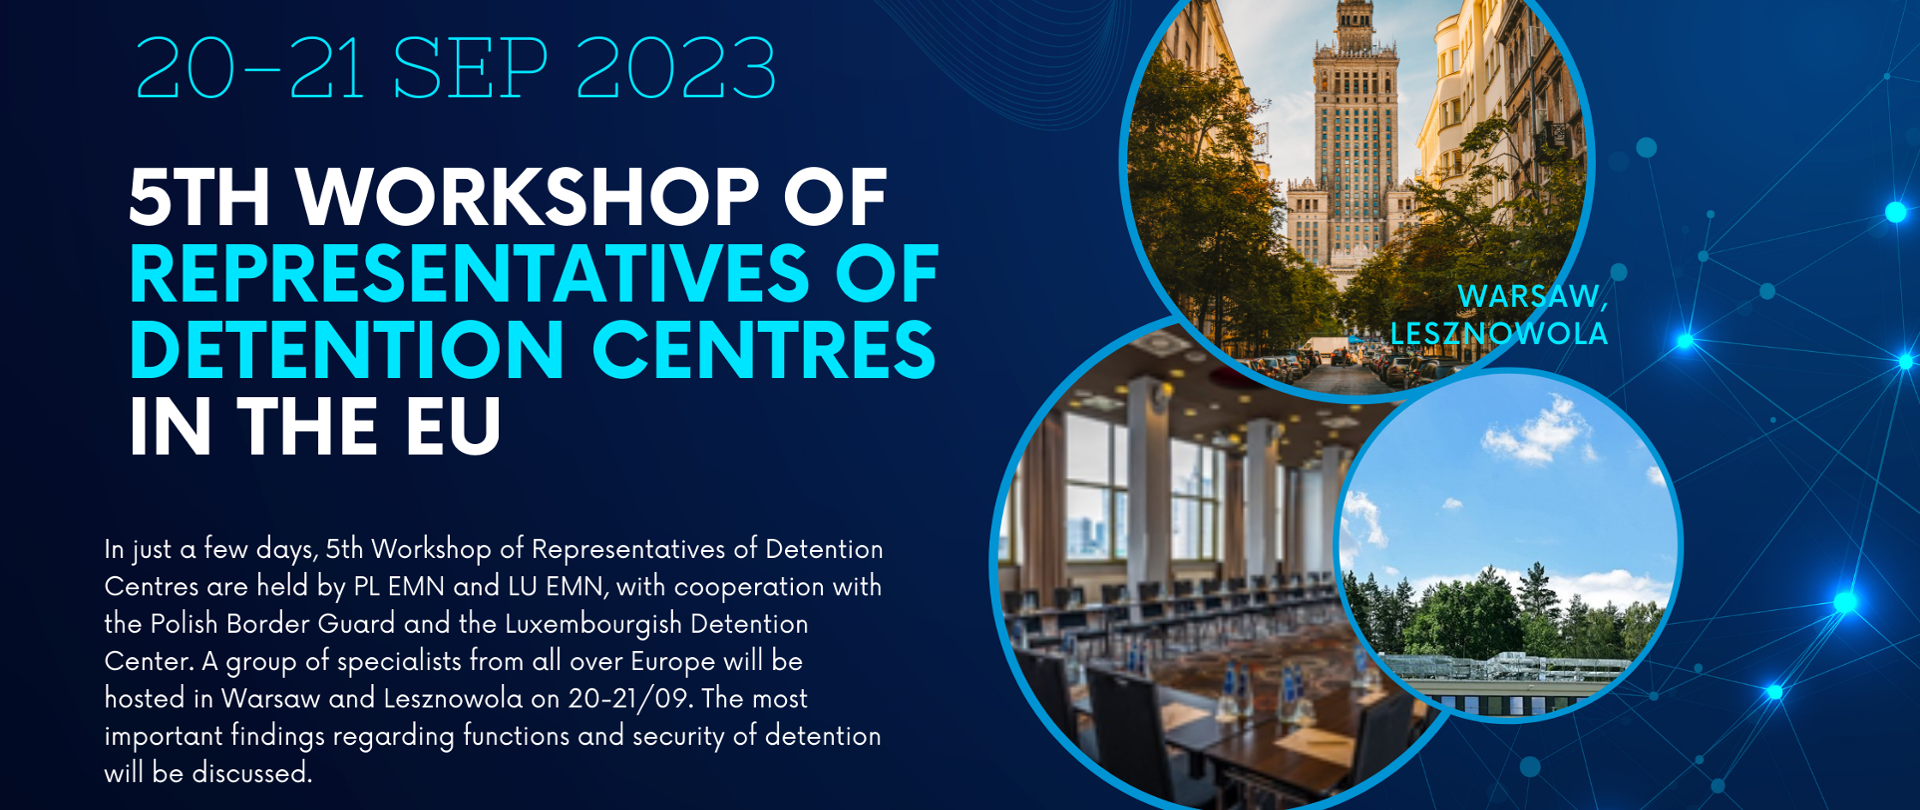 5th Workshop of Representatives of Detention Centres in the EU